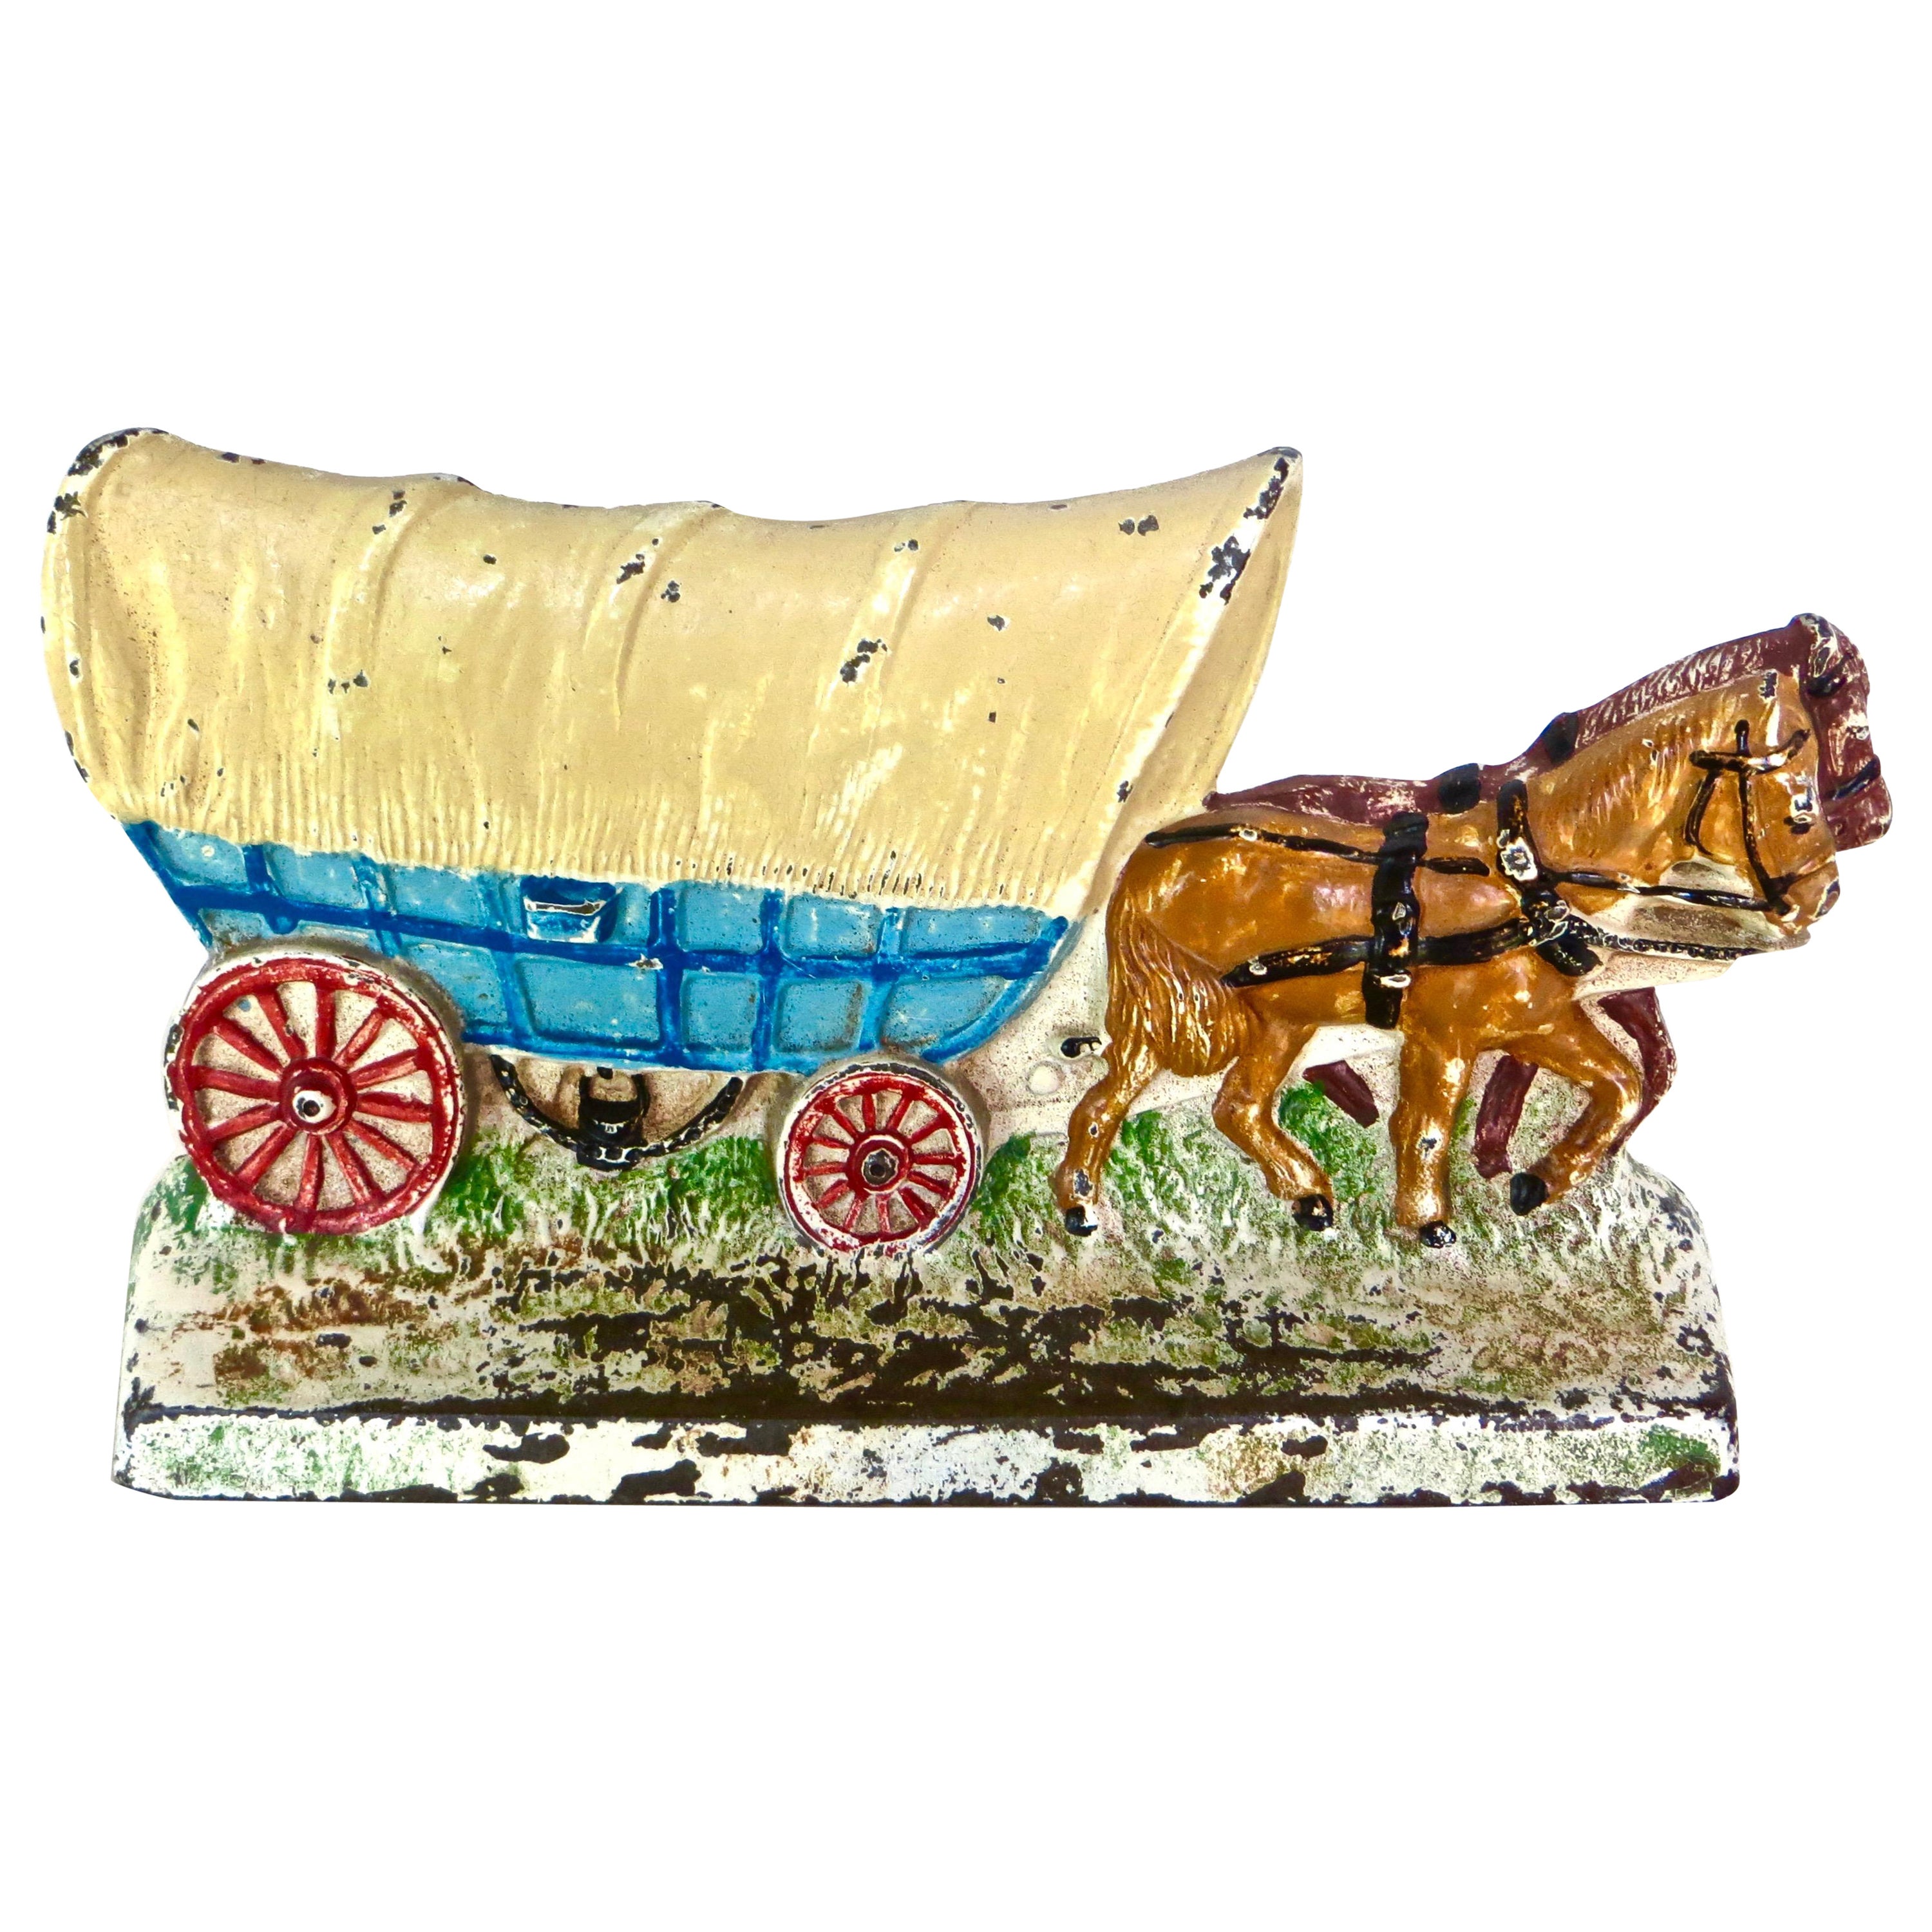 Cast Iron Doorstop "Conestoga Covered Wagon" Hubley Manufacturing C0; Circa 1930 For Sale